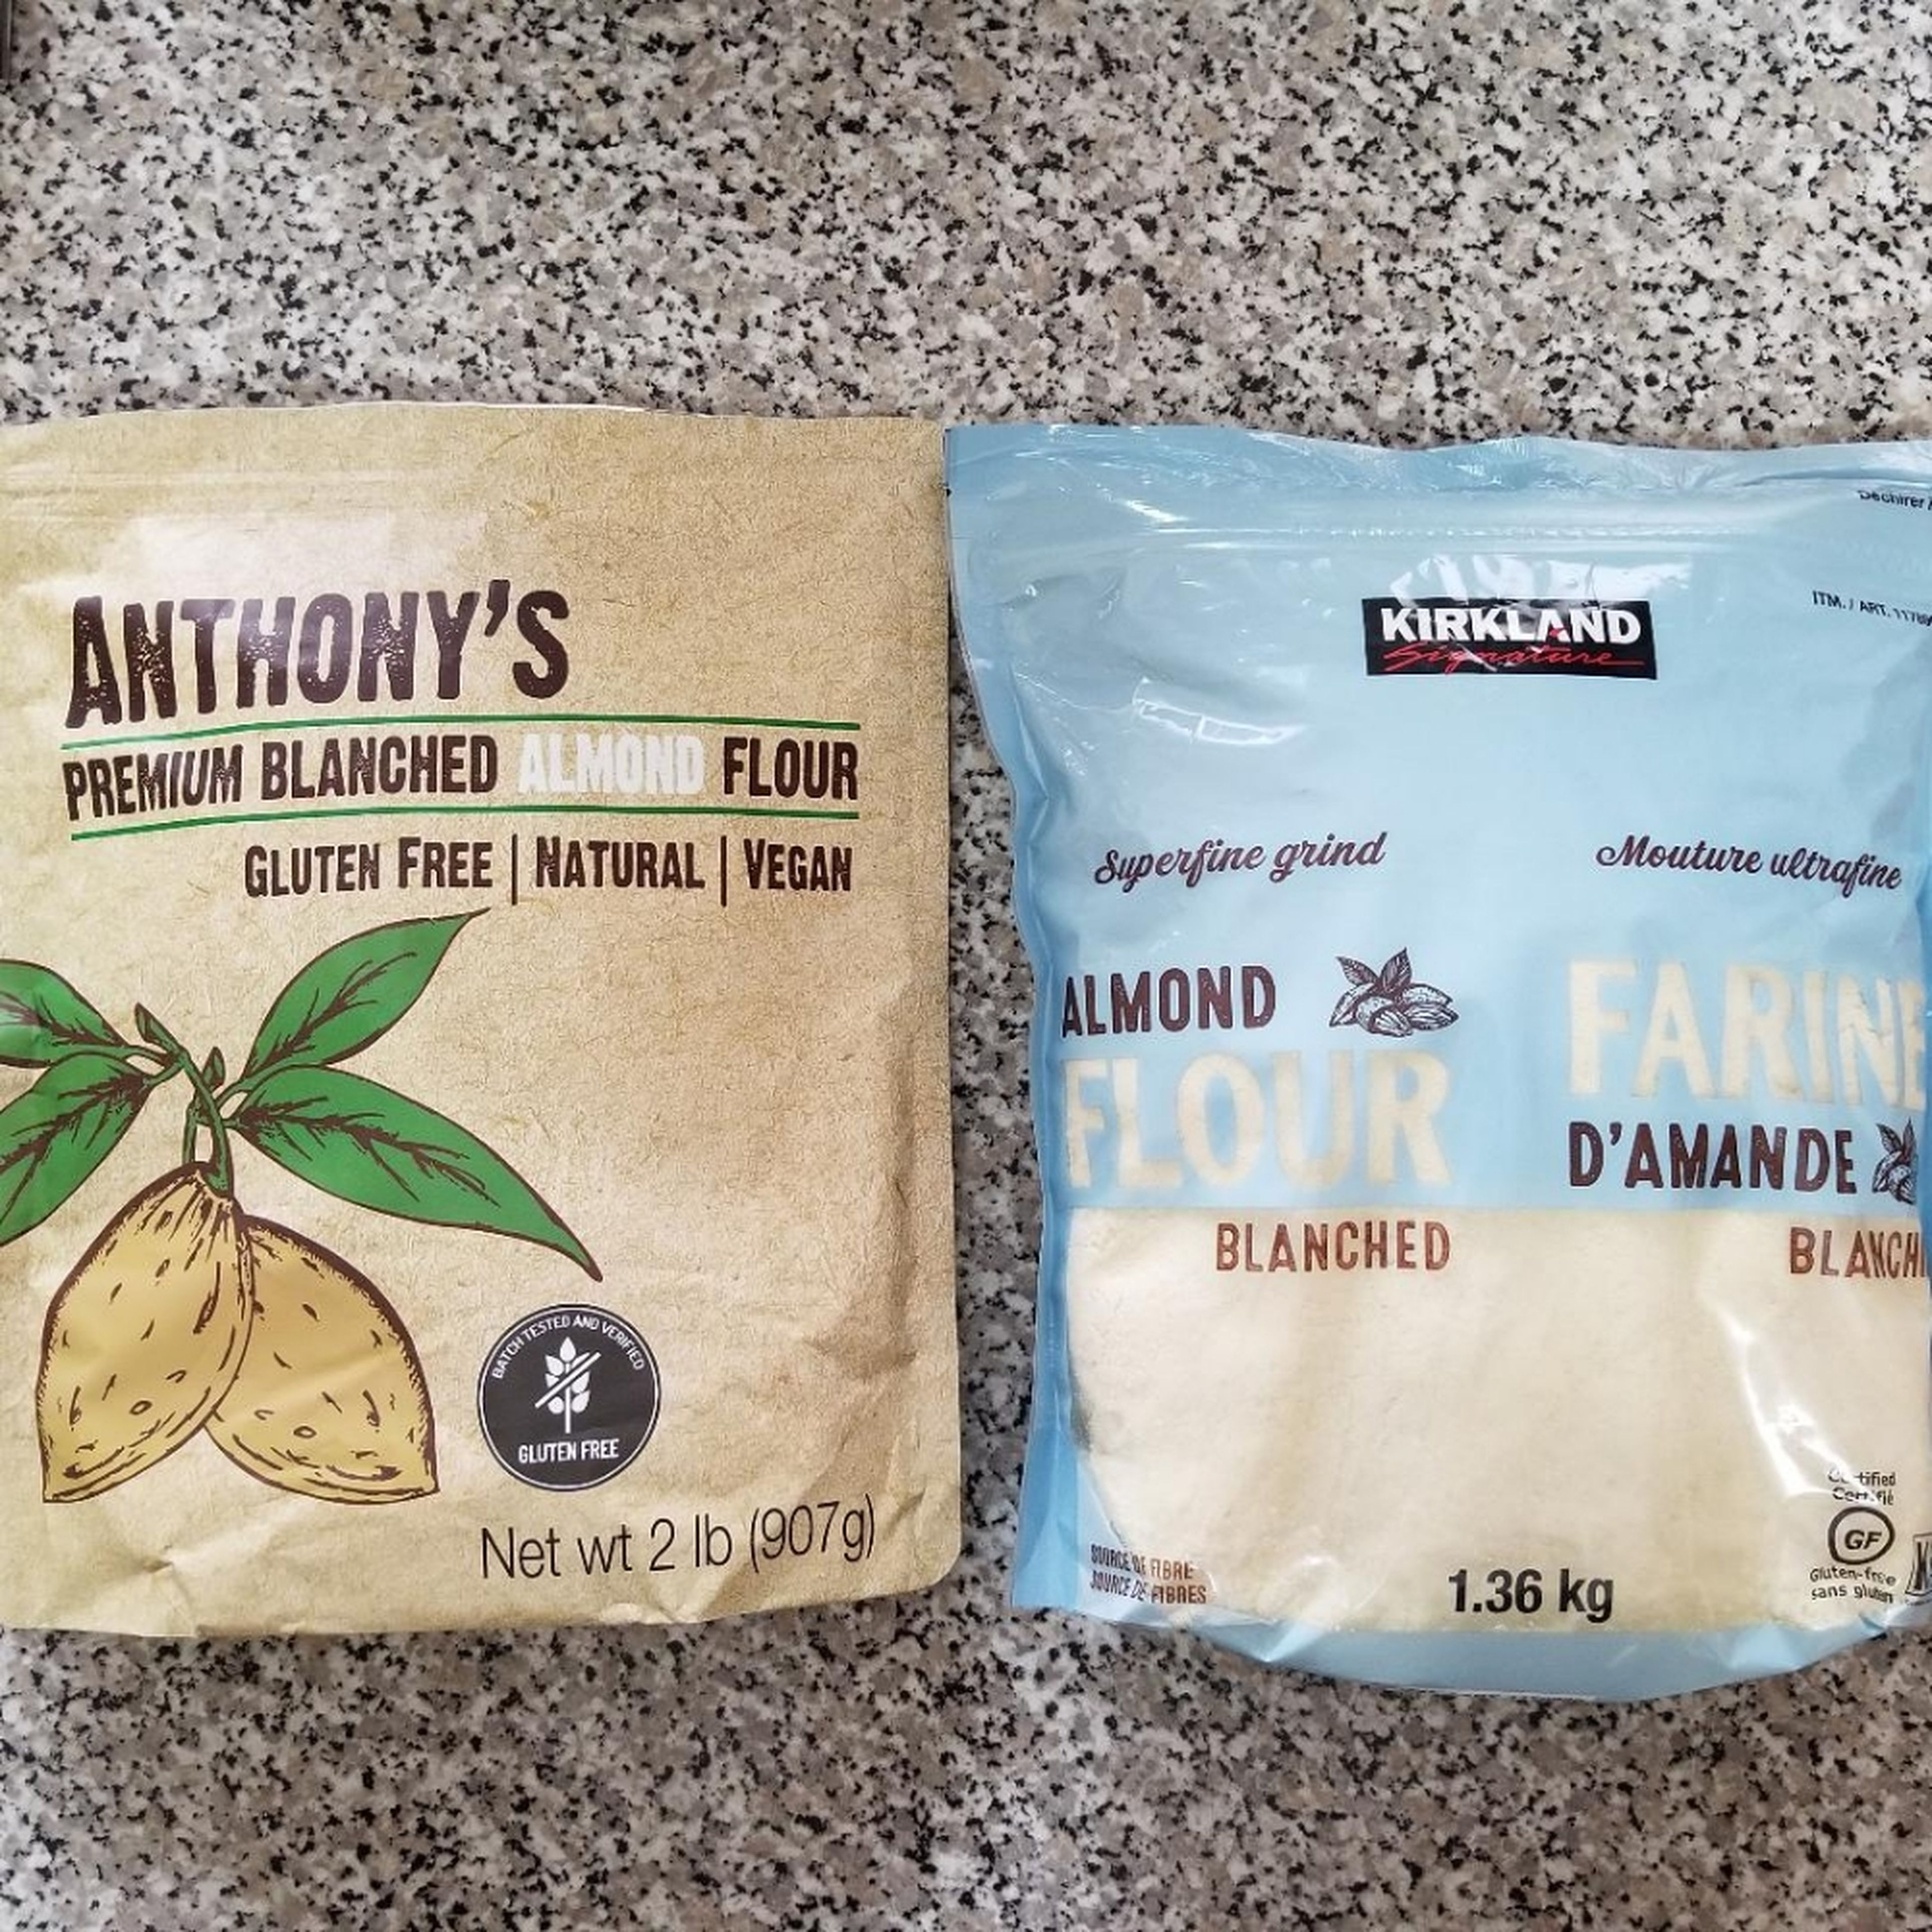 Add 200g almond flour to large mixing bowl. I generally use Anthony's brand (available at the Low Carb Grocery store) or the Kirkland brand from Costco.